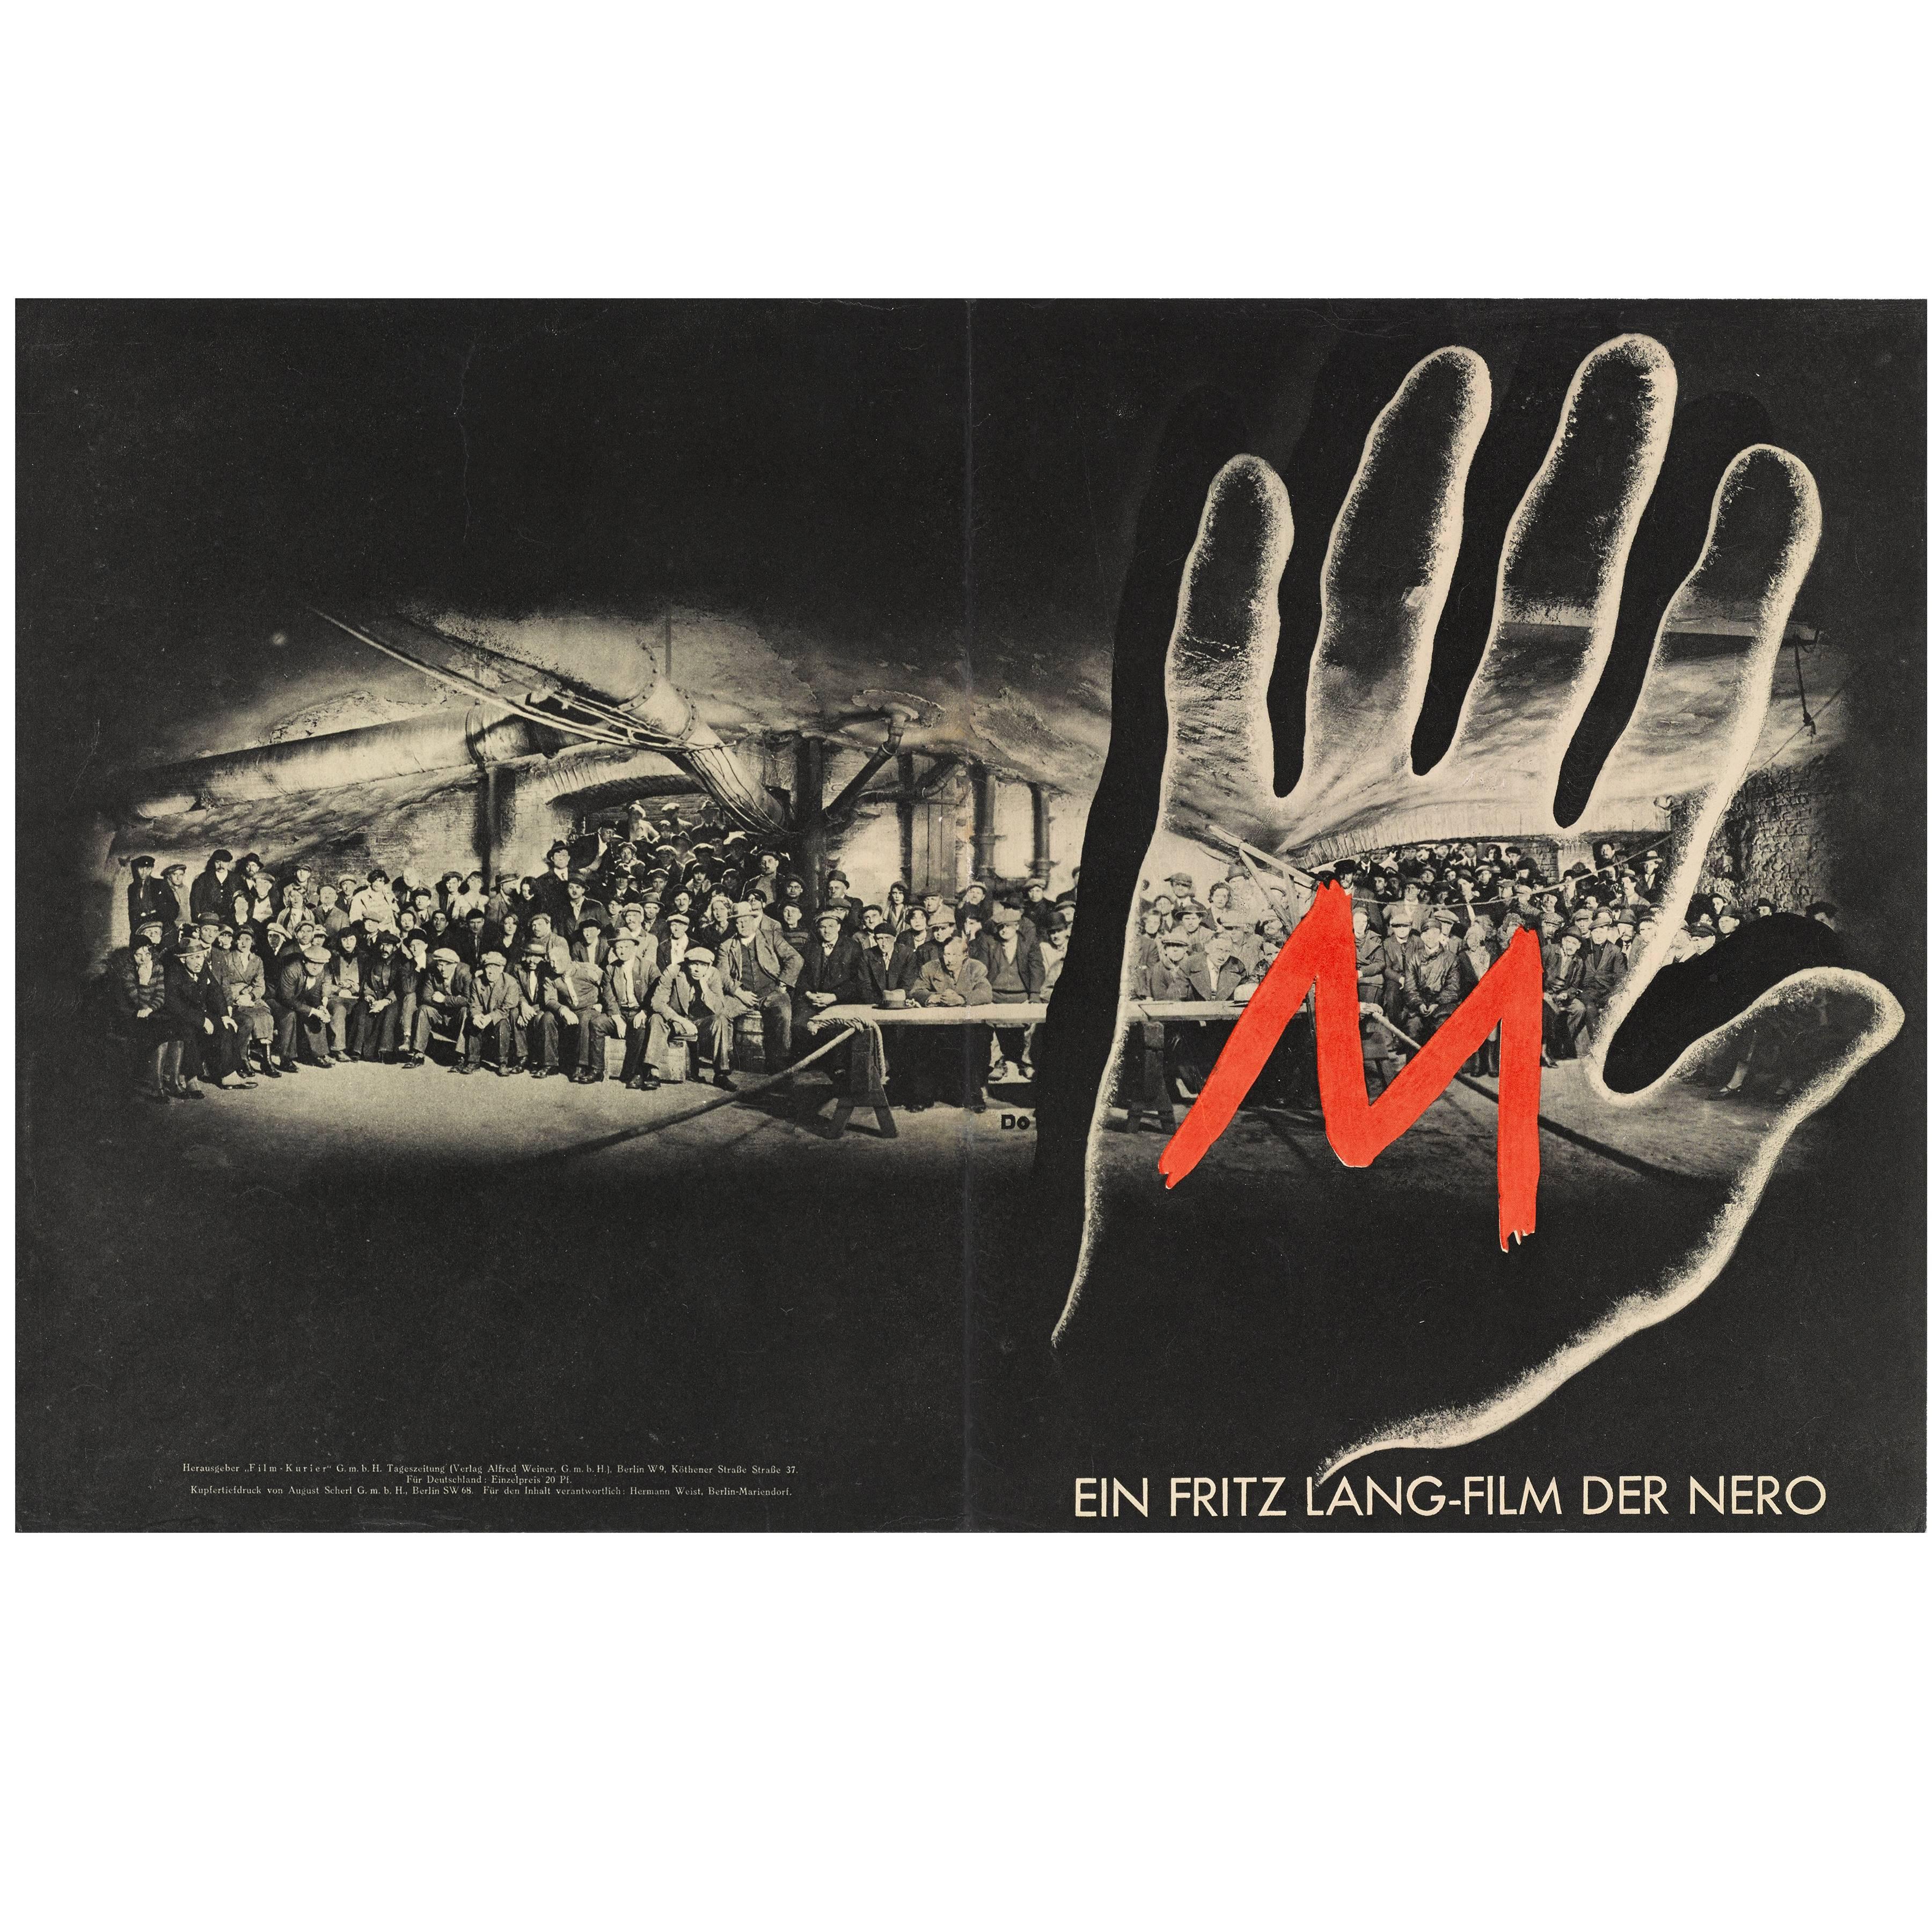 "M" Original German Cover from Film Program from 1931